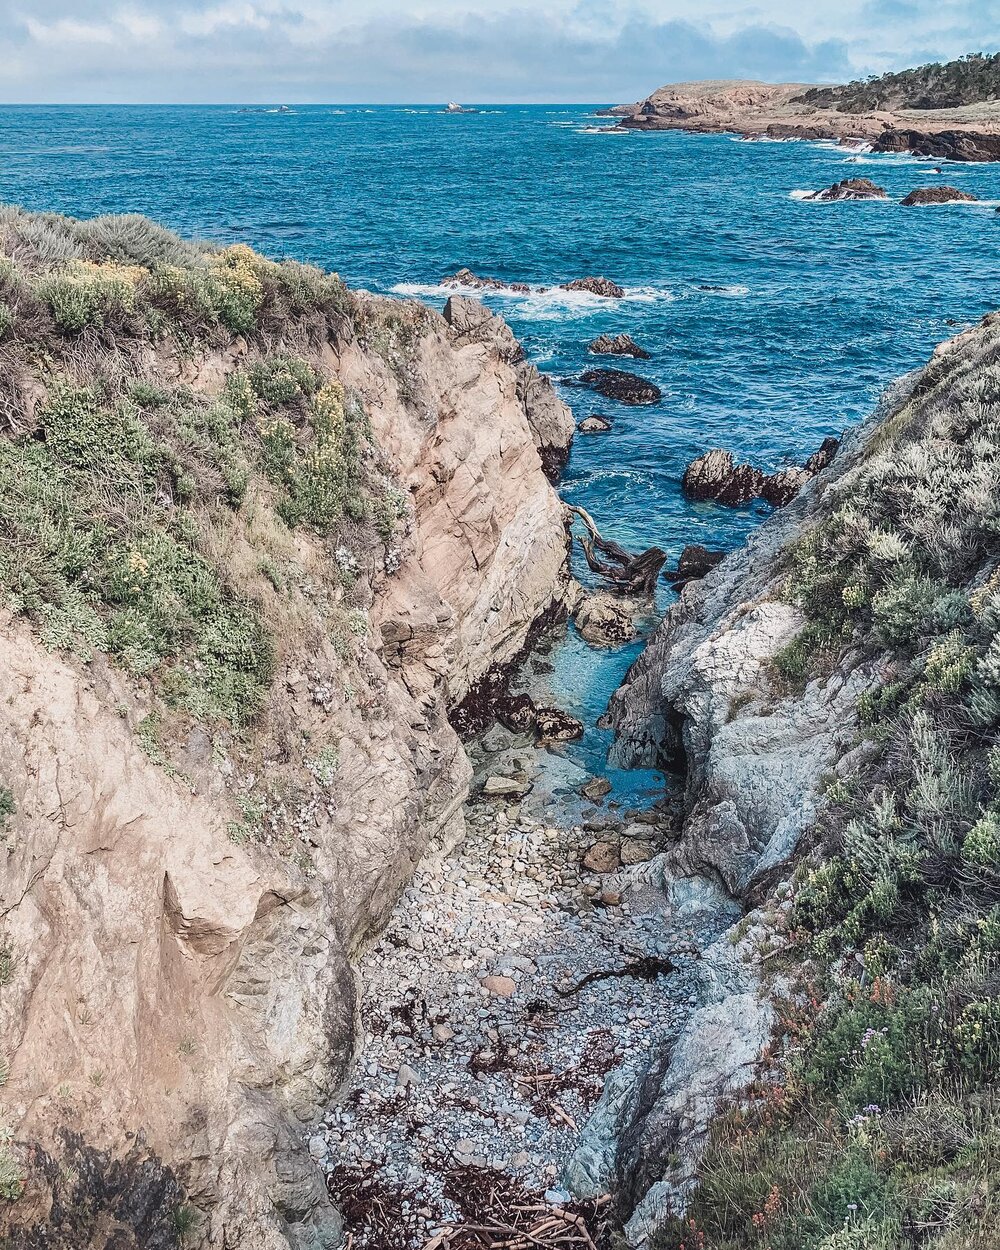 Point Lobos Natural Reserve was one of my favorite stops along the PCH in California.

There are plenty of trails to explore here and lots of animal watching to be done.

The one part about it that was inconvenient was that dogs are not permitted in 